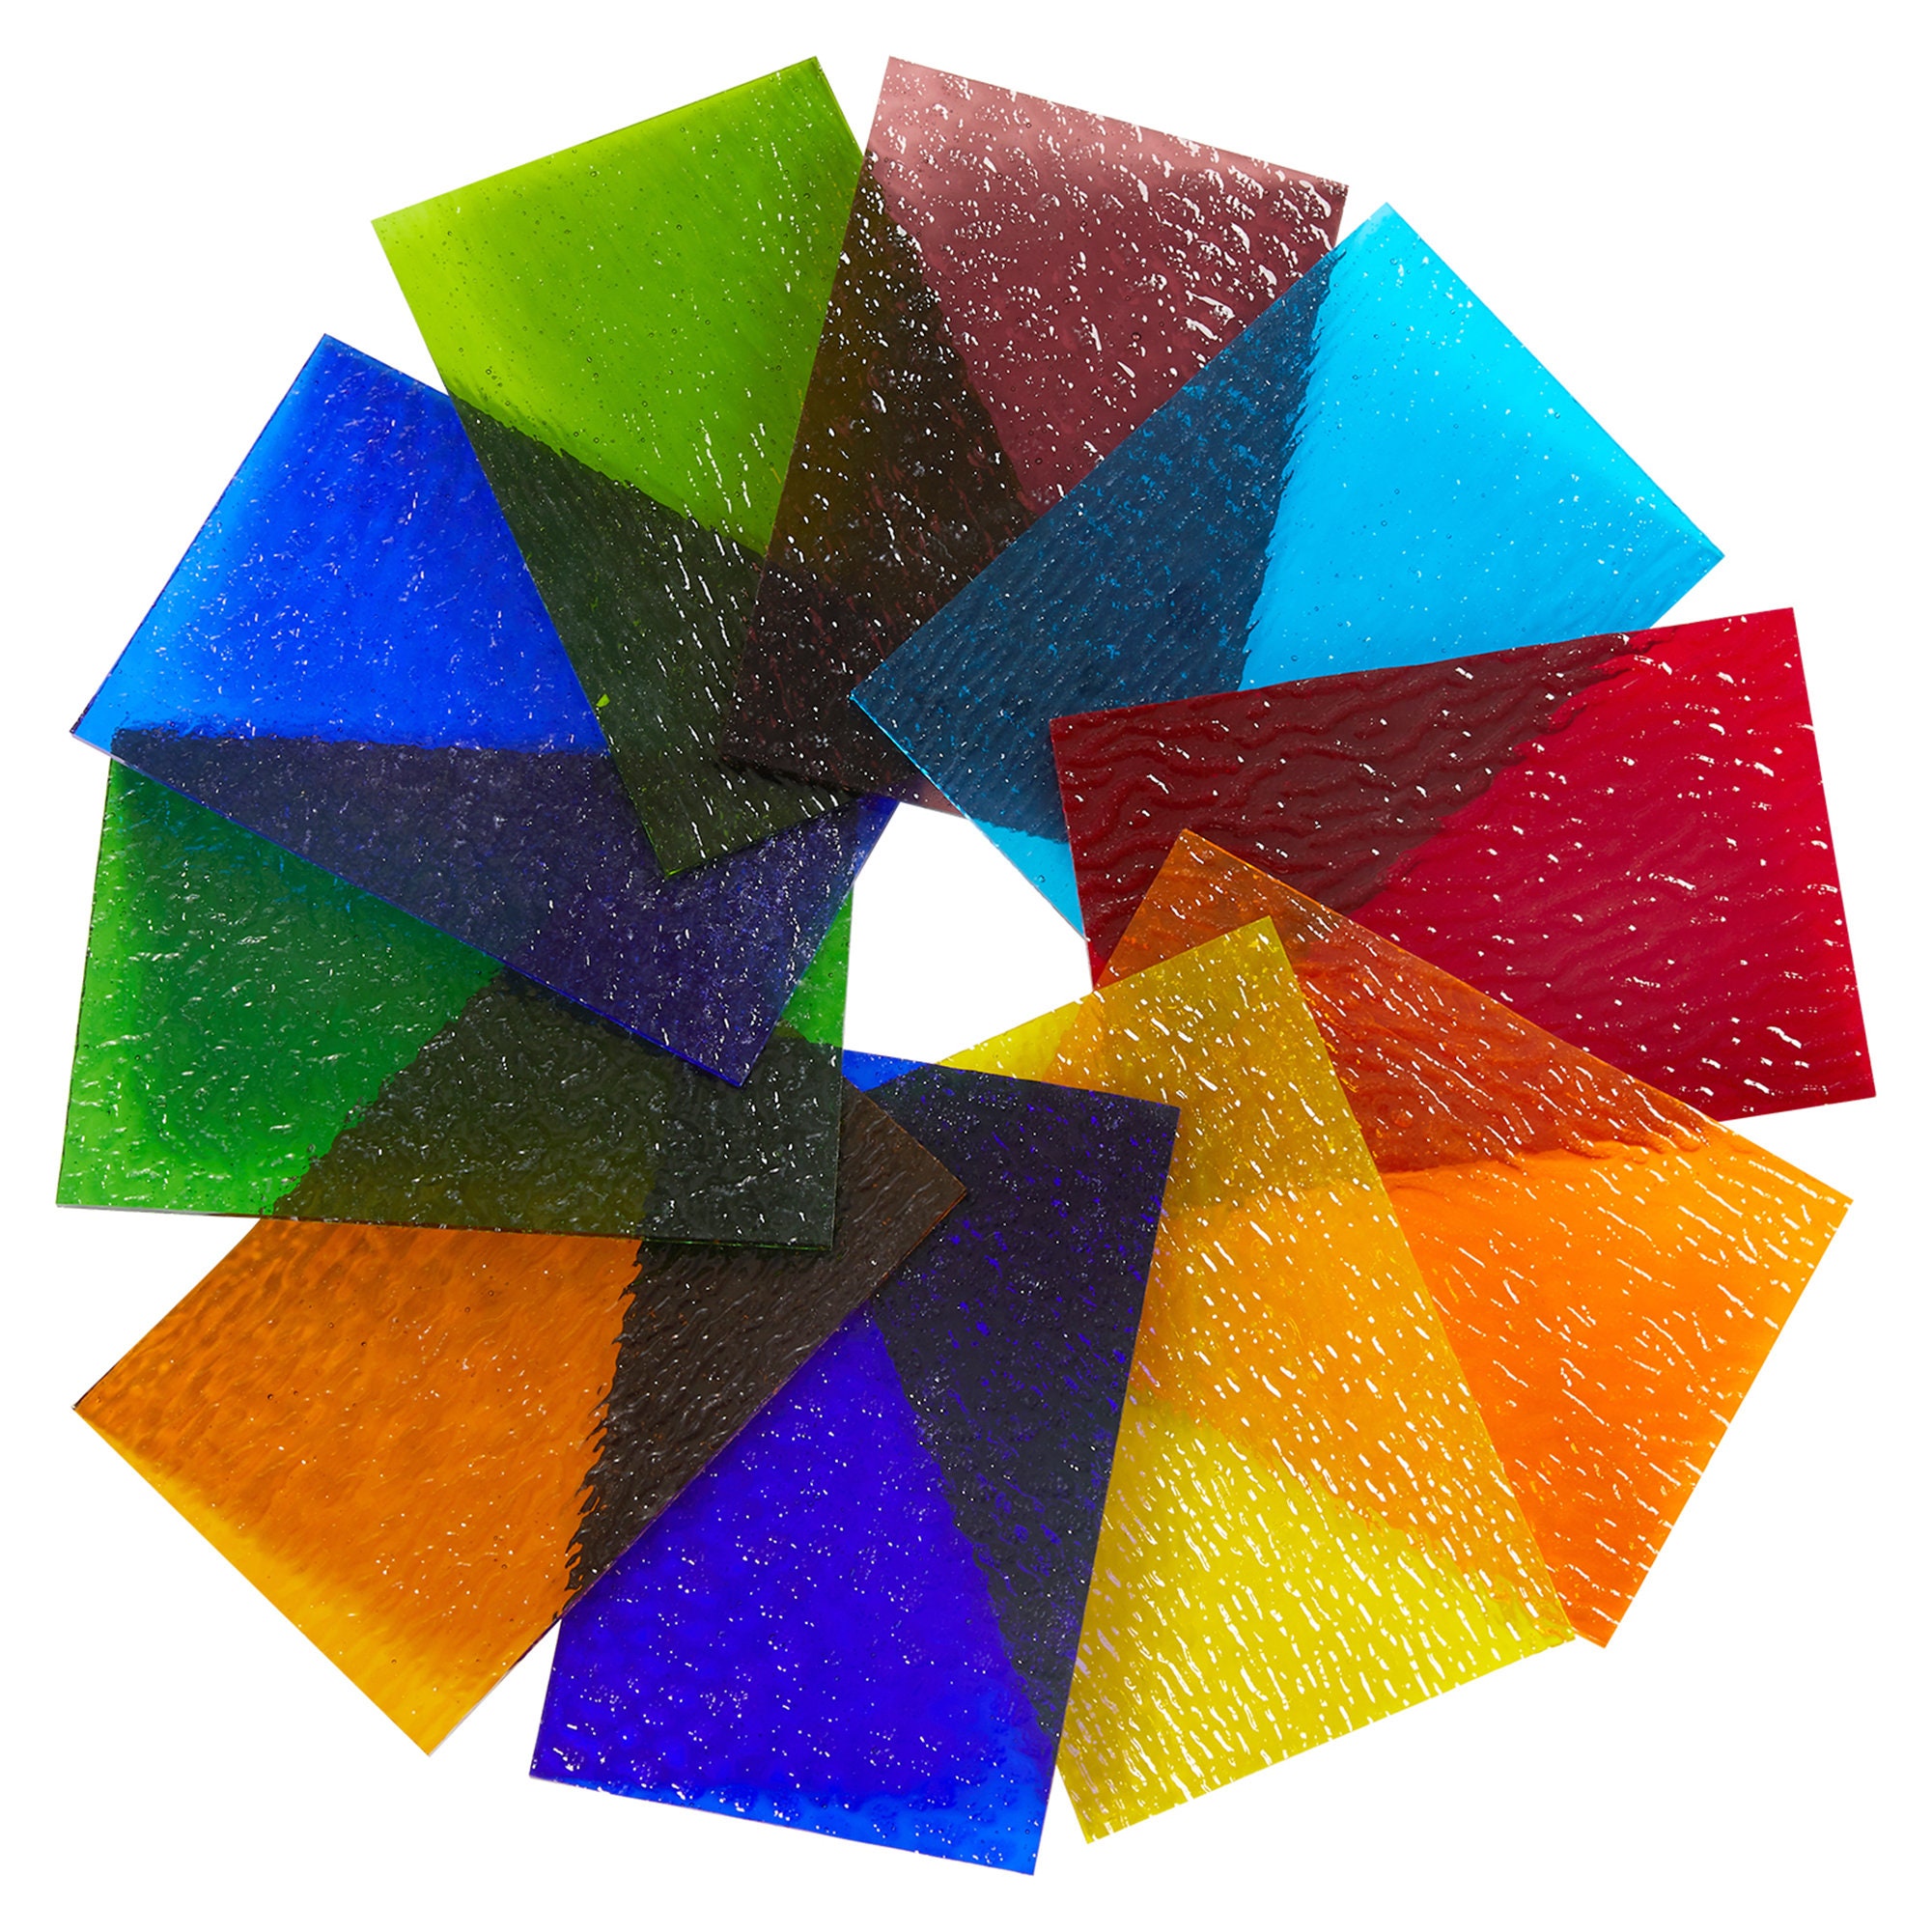 6 Pcs Stained Glass Sheets 12x12 Colored Mica Flakes Water Ripple Glass  Mosaic Cathedral Stained Clear Holder Plate For